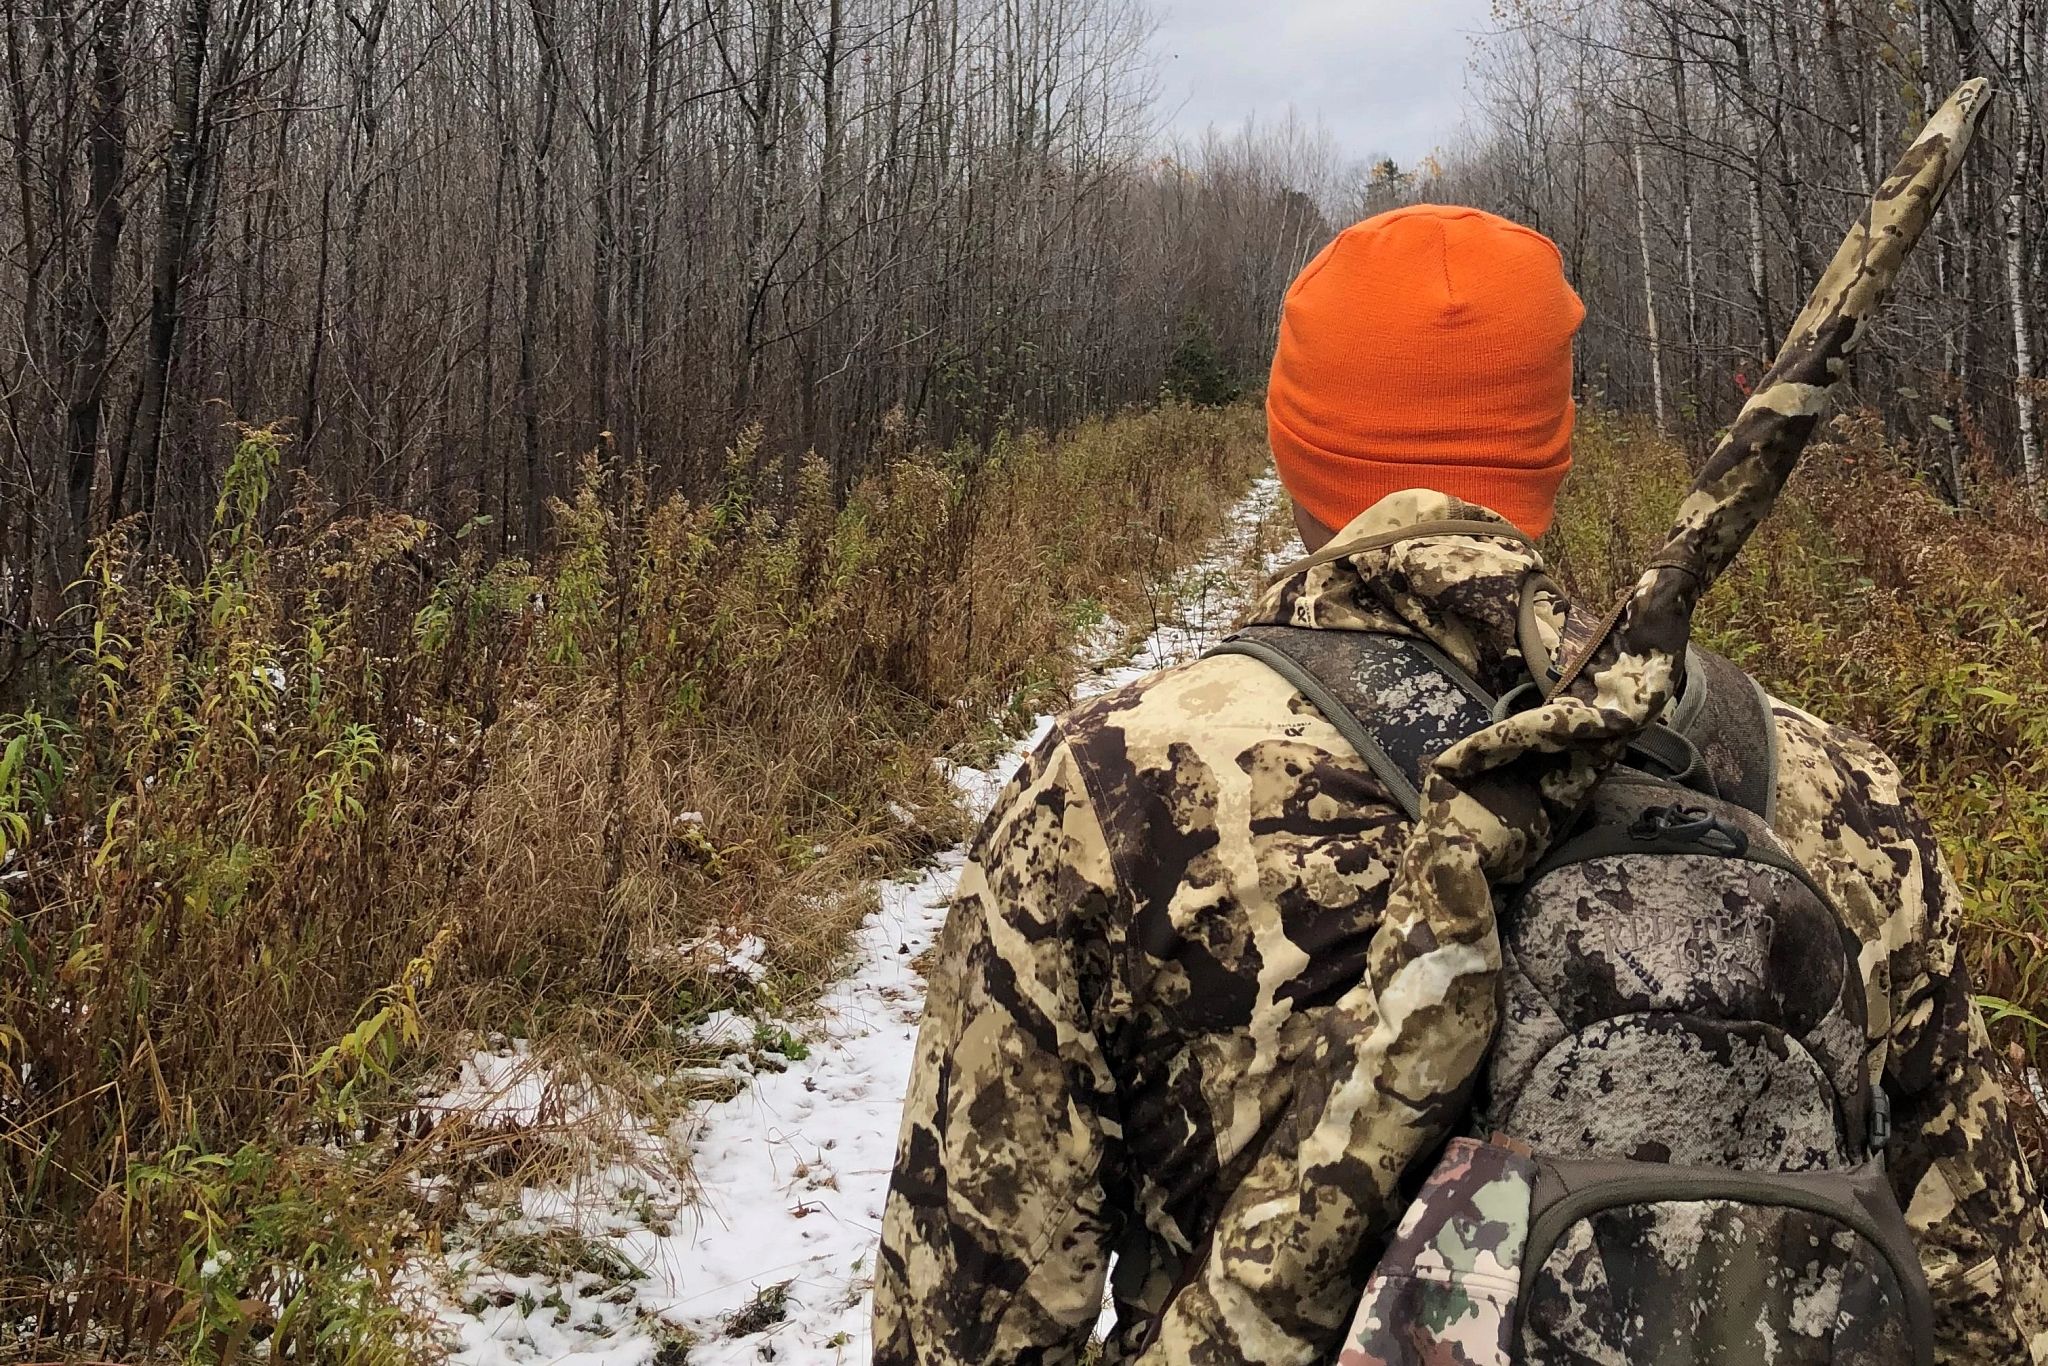 An image of a hunter outdoors from behind wearing a camouflage jacket and orange hat preparing for a hunt. 